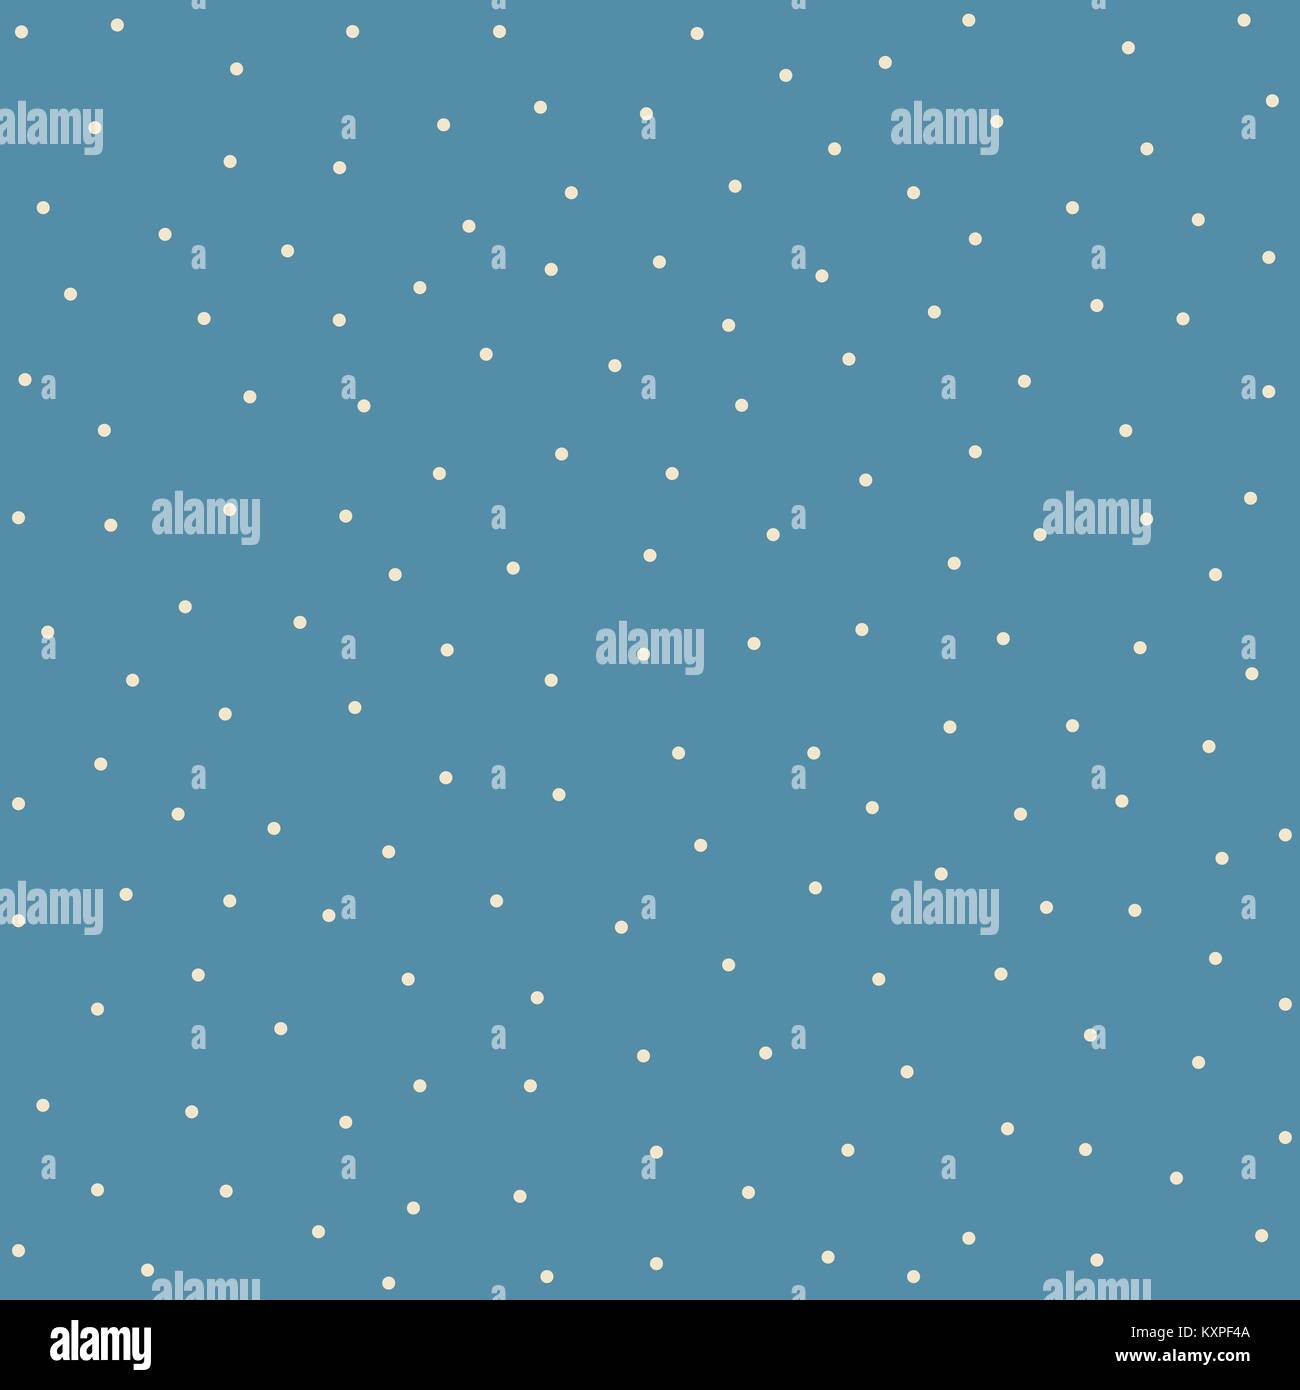 Seamless pattern with dots on blue background. Great for wrapping, textiles, fabric, swatches, backdrops, templates, etc. Vector Illustration Stock Vector